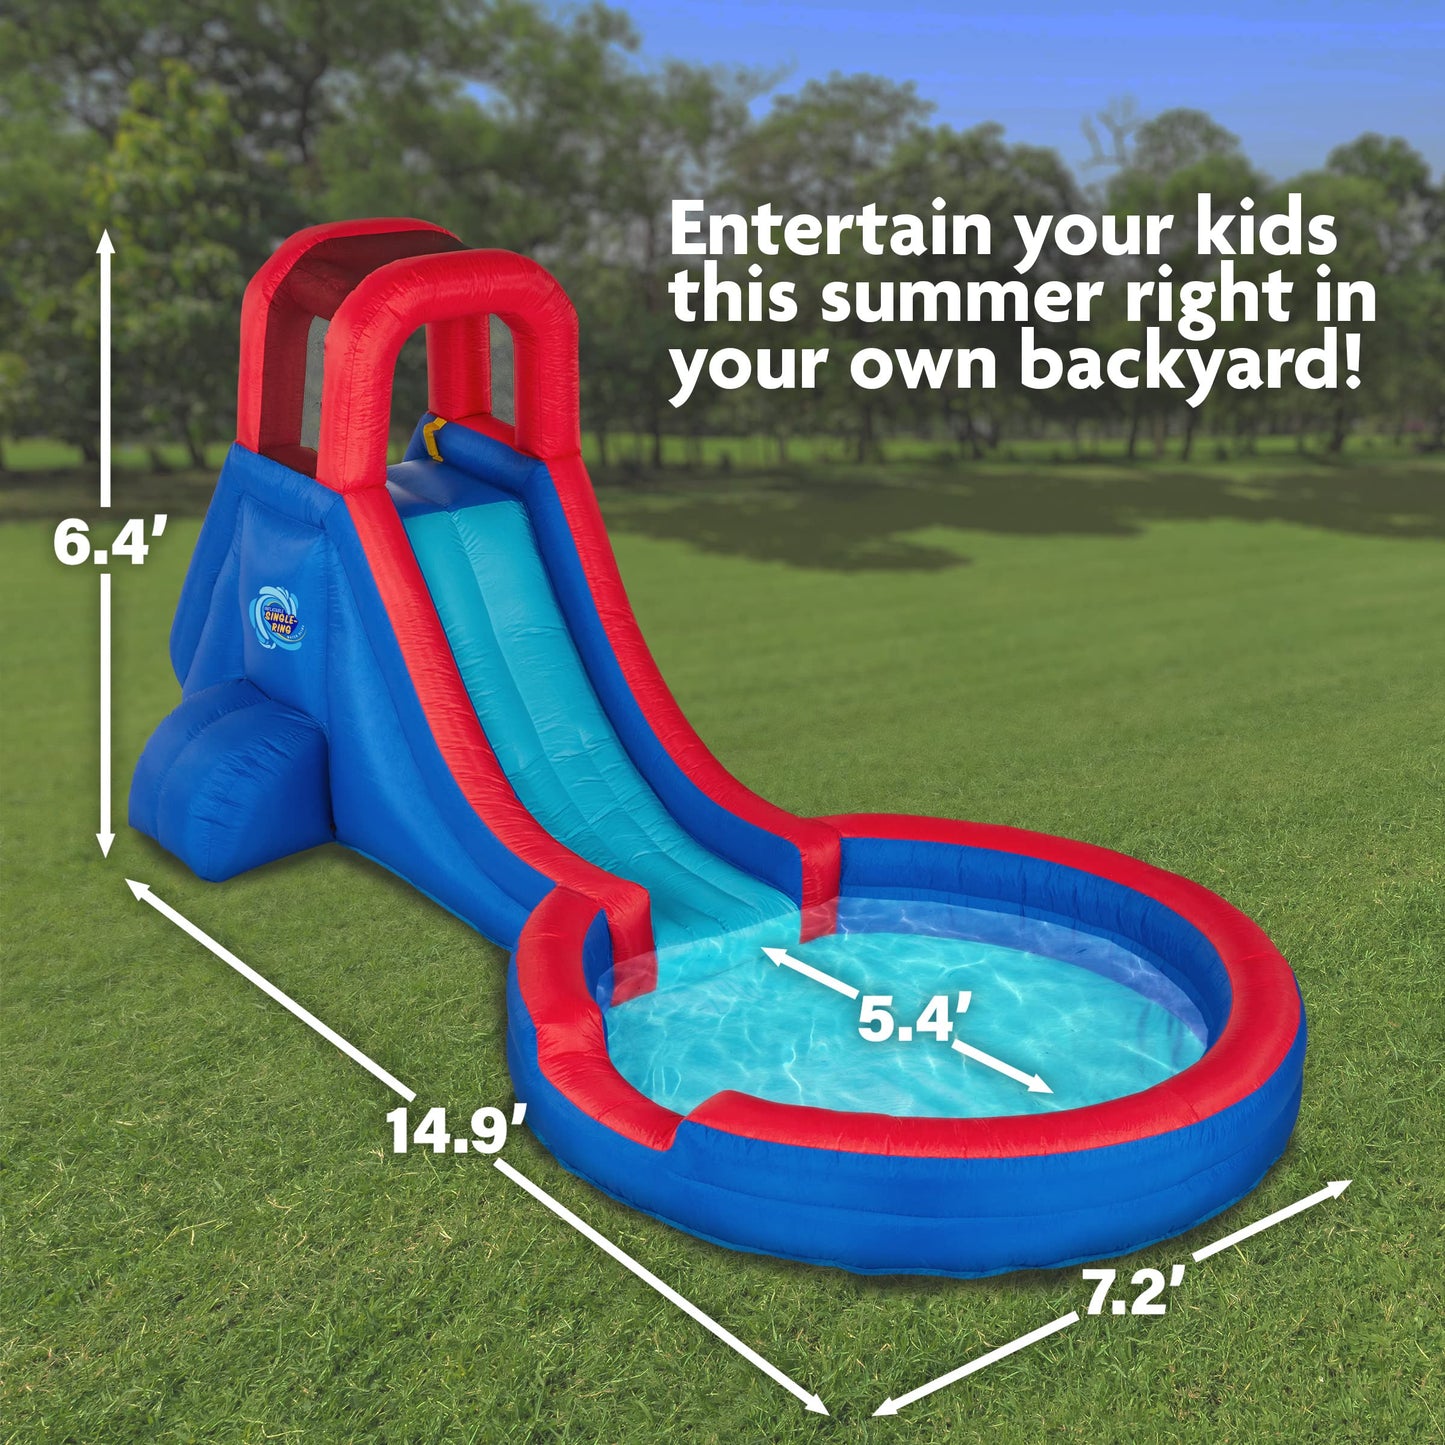 Sunny & Fun Inflatable Single Ring Water Slide Park – Heavy-Duty for Outdoor Fun - Climbing Wall, Slide & Deep Pool – Easy to Set Up & Inflate with Included Air Pump & Carrying Case Blue/Red